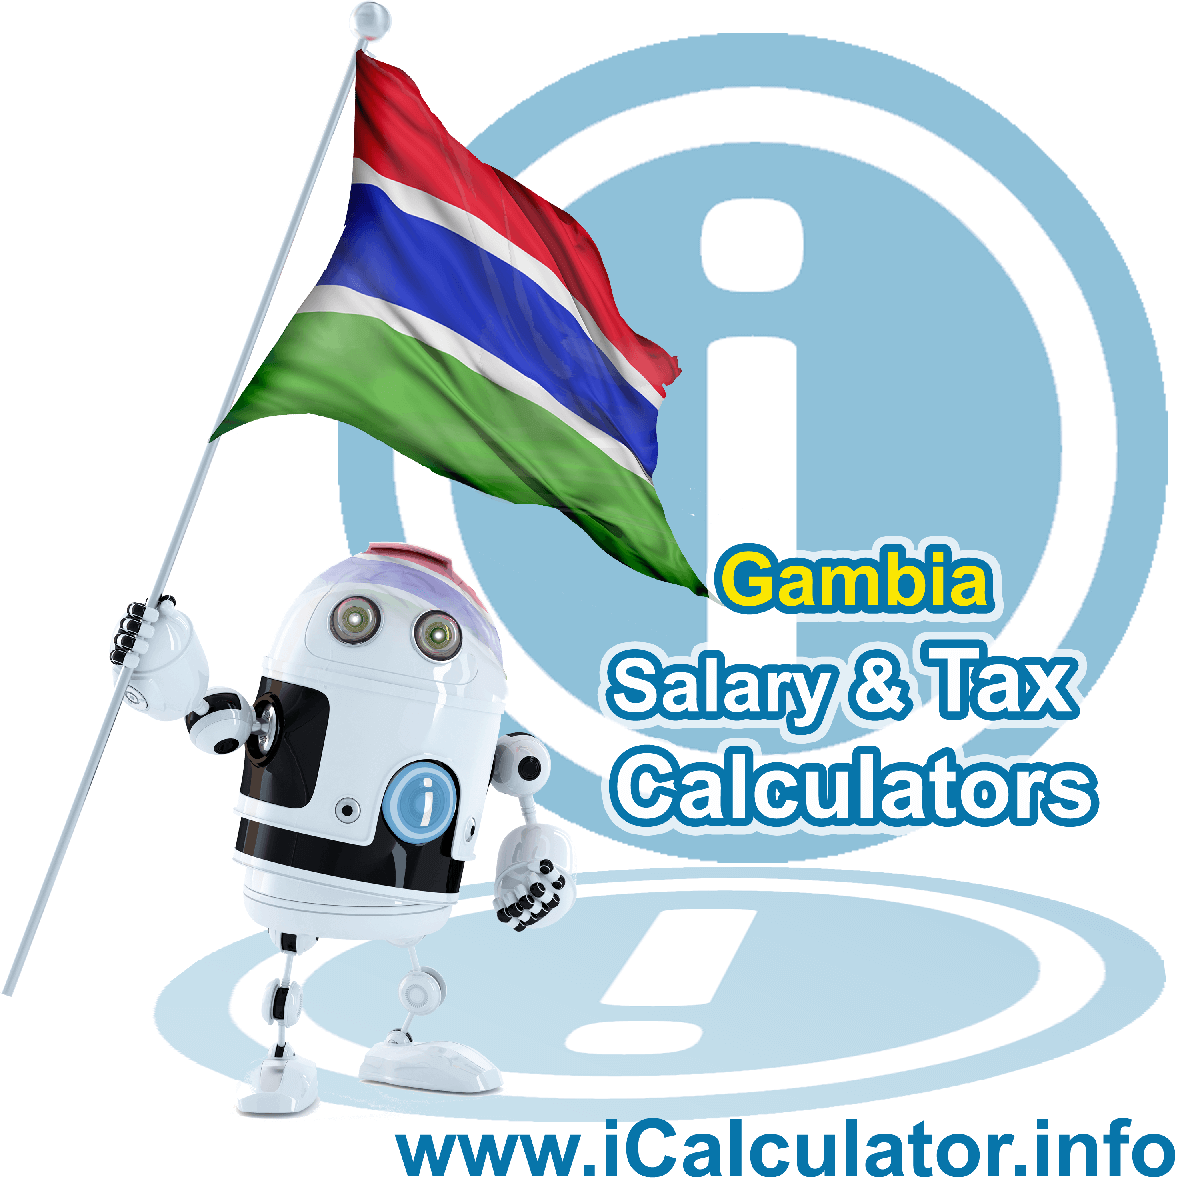 Gambia Tax Calculator. This image shows the Gambia flag and information relating to the tax formula for the Gambia Salary Calculator